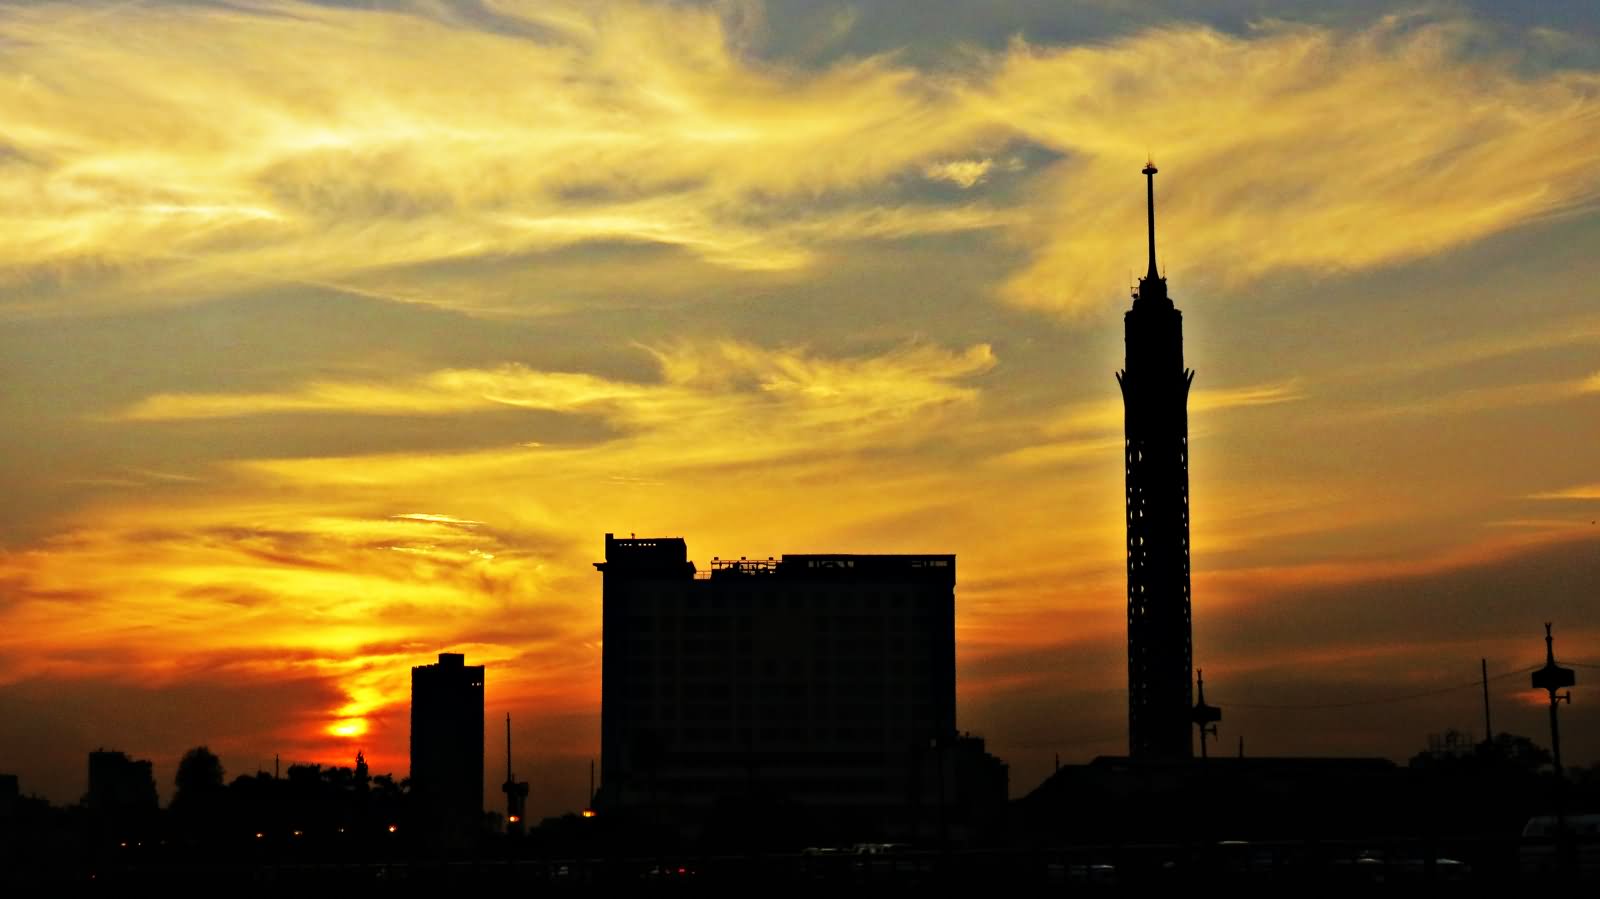 Silhouette View Of The Cairo Tower During Sunset